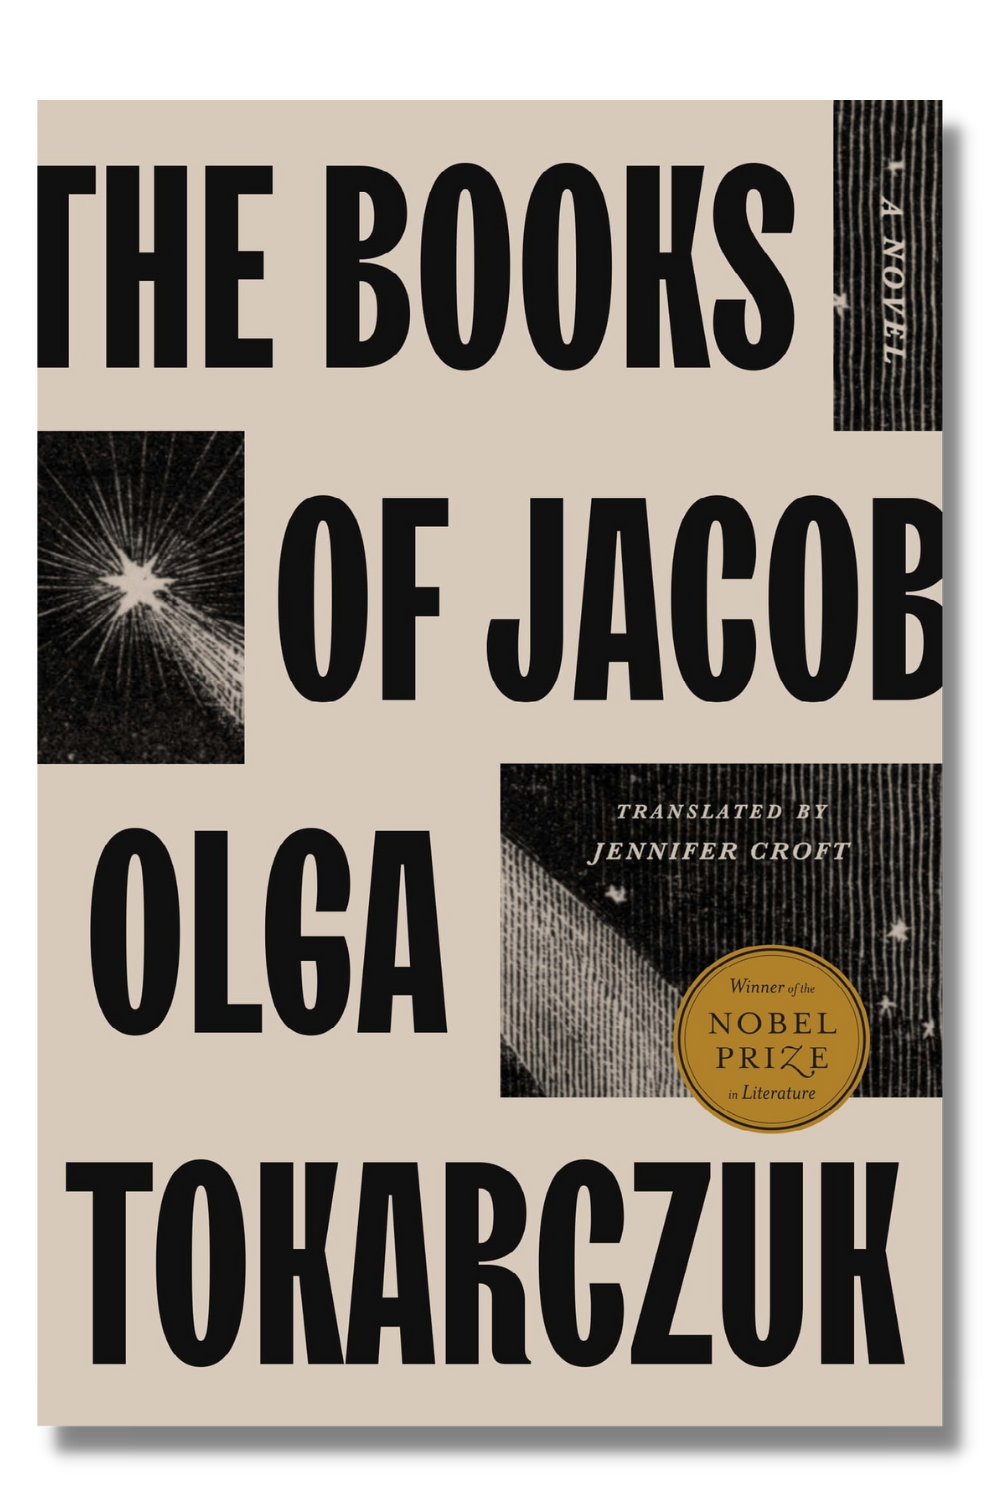 The cover of "The Books of Jacob"